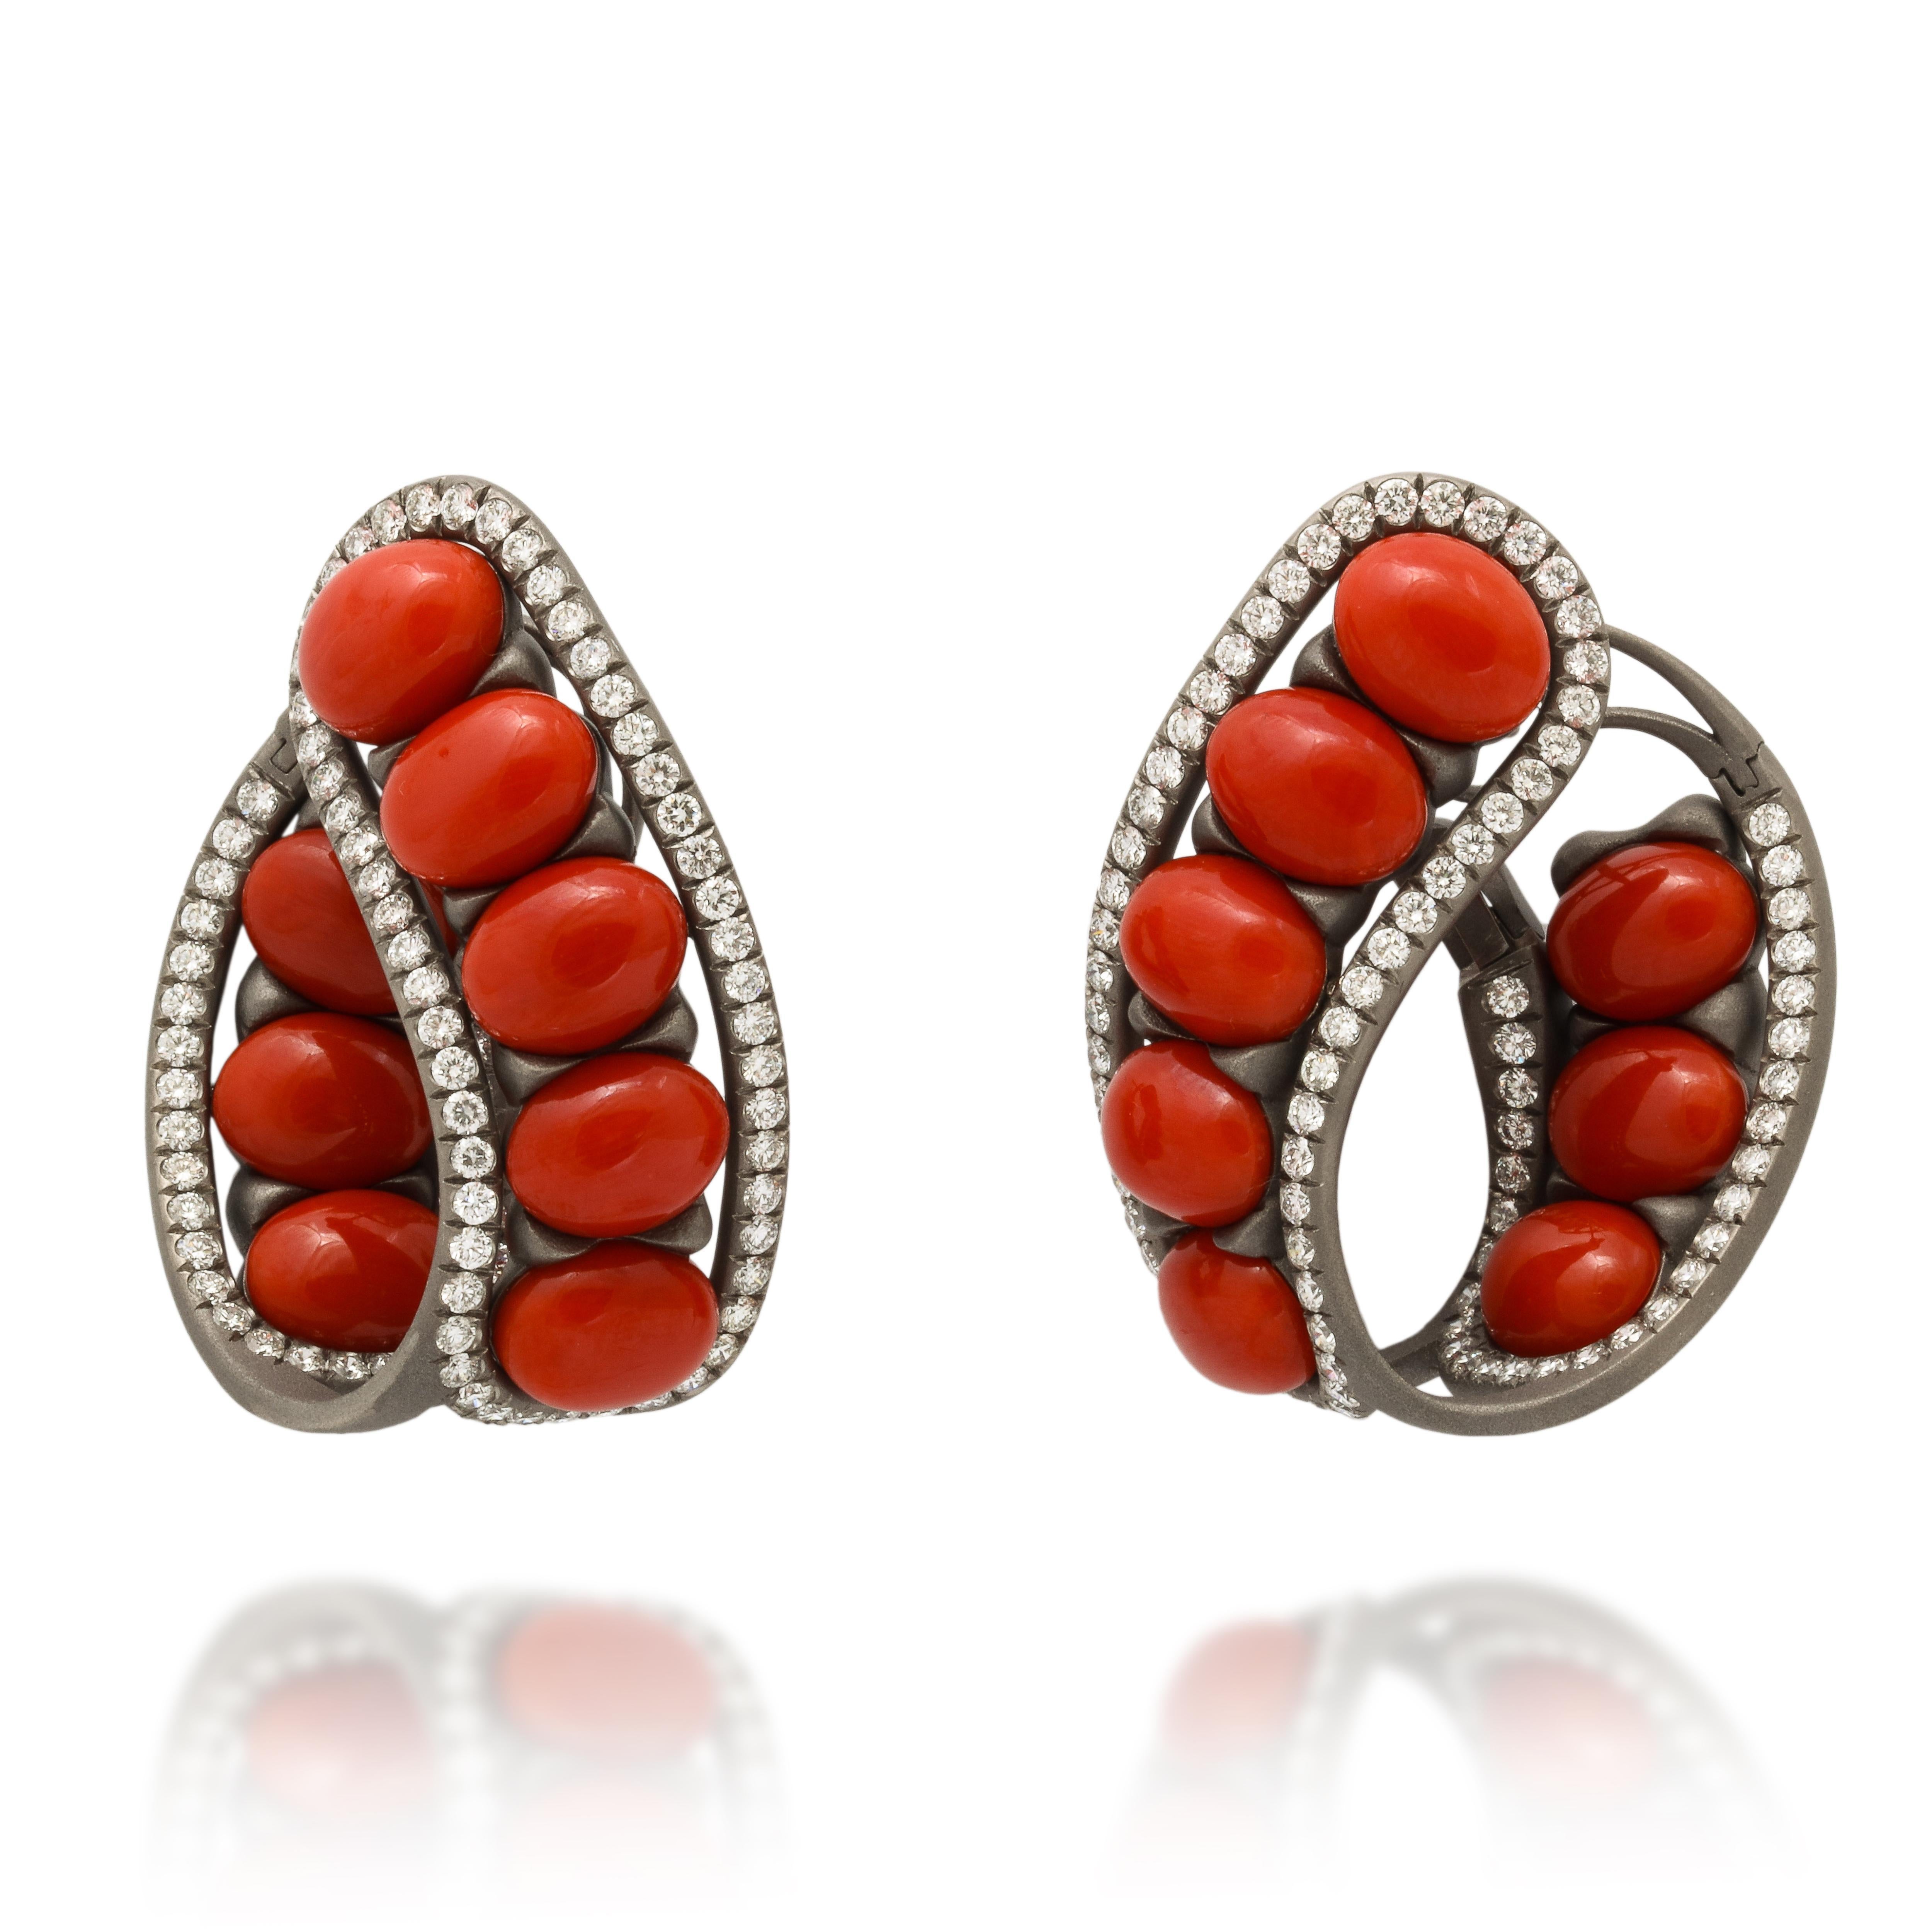 A bold and striking design, featuring vivid orange Mediterranean coral, framed with diamonds and mounted in brushed grey titanium.   At a full 1 1/2 x 1 1/4 inches these are definitely statement earrings, however the use of titanium makes them 80%